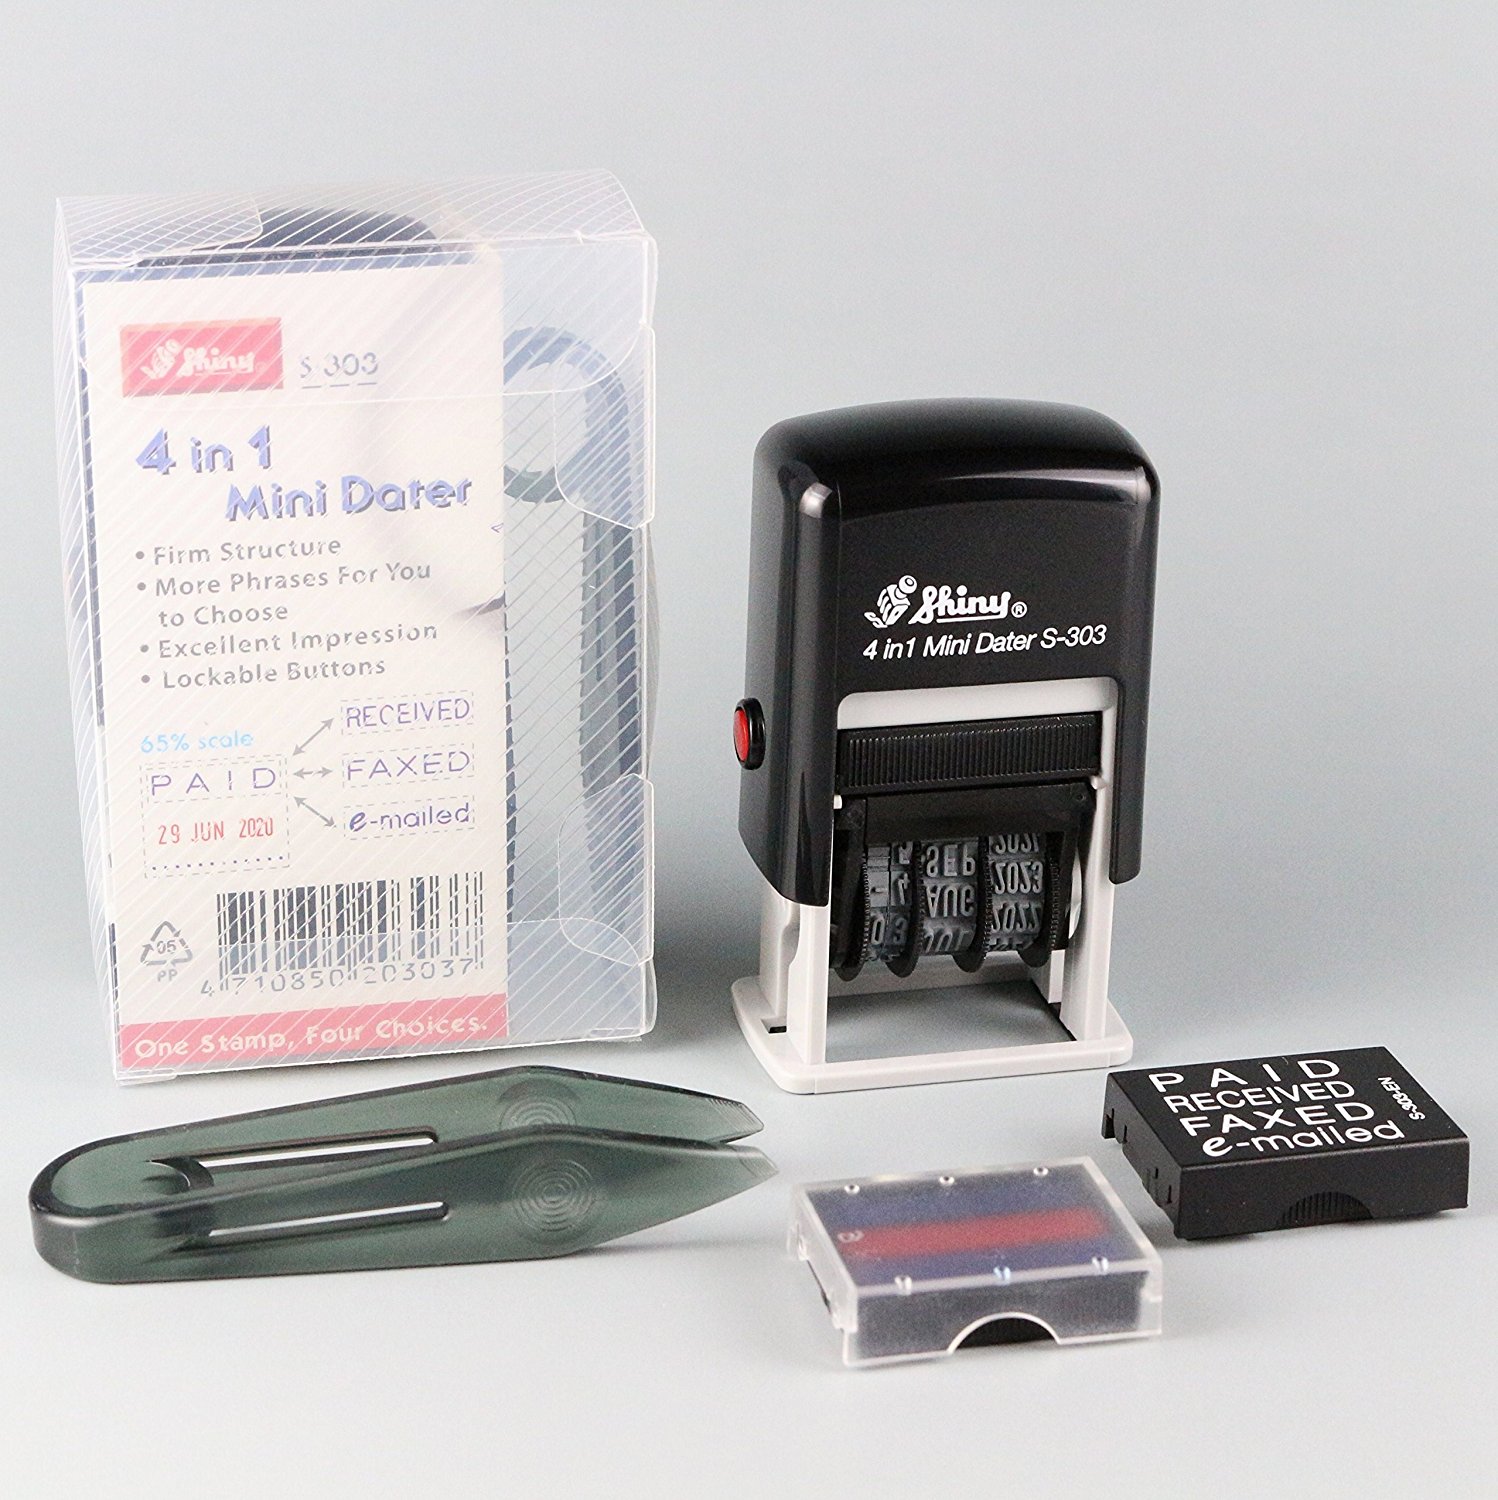 SCANNED Shiny S303 Rubber Date Stamp Black Ink S-303 